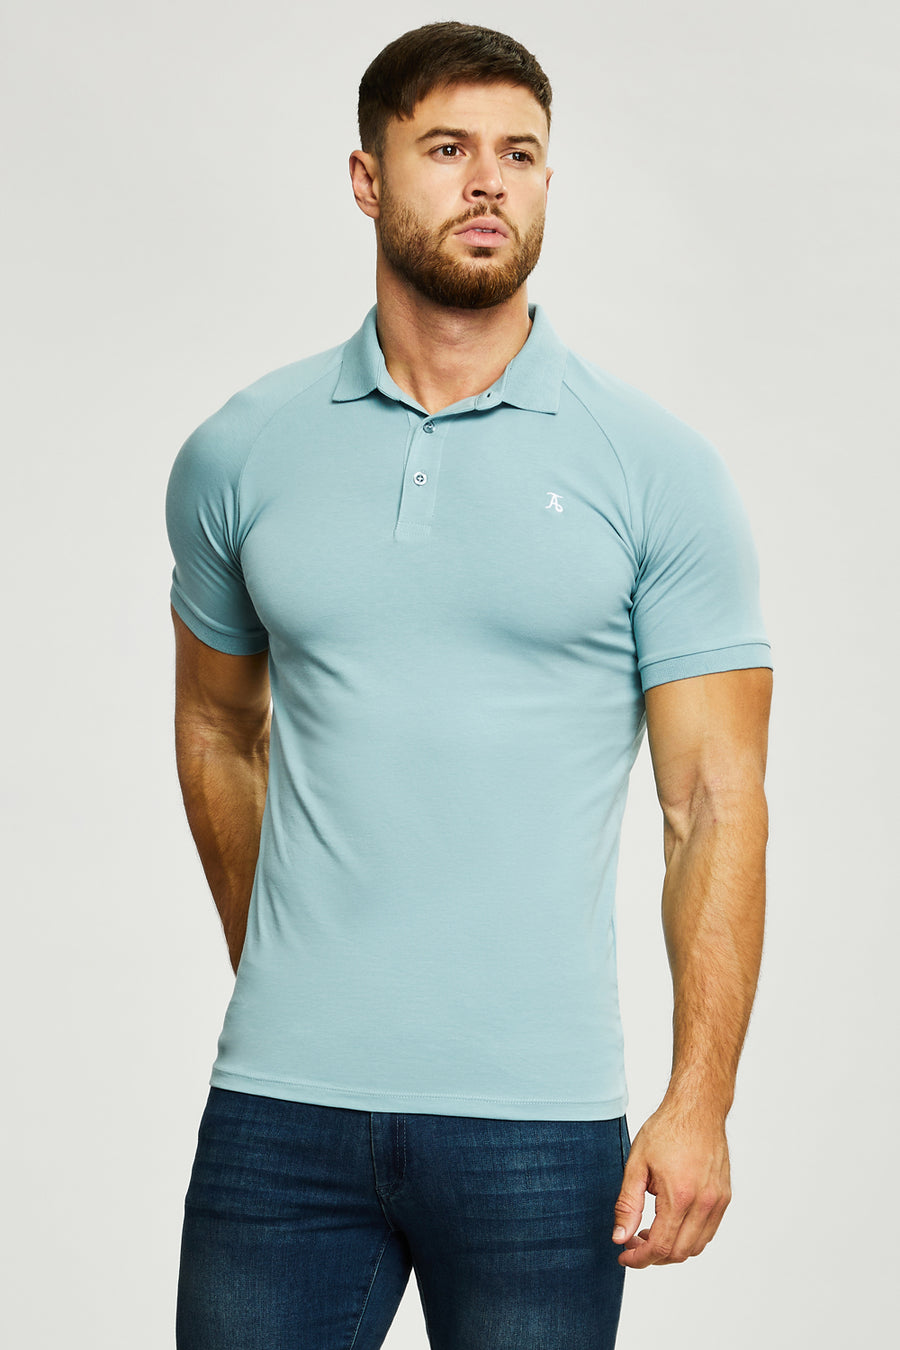 Athletic Fit Polo Shirt in Sea Foam - TAILORED ATHLETE - USA